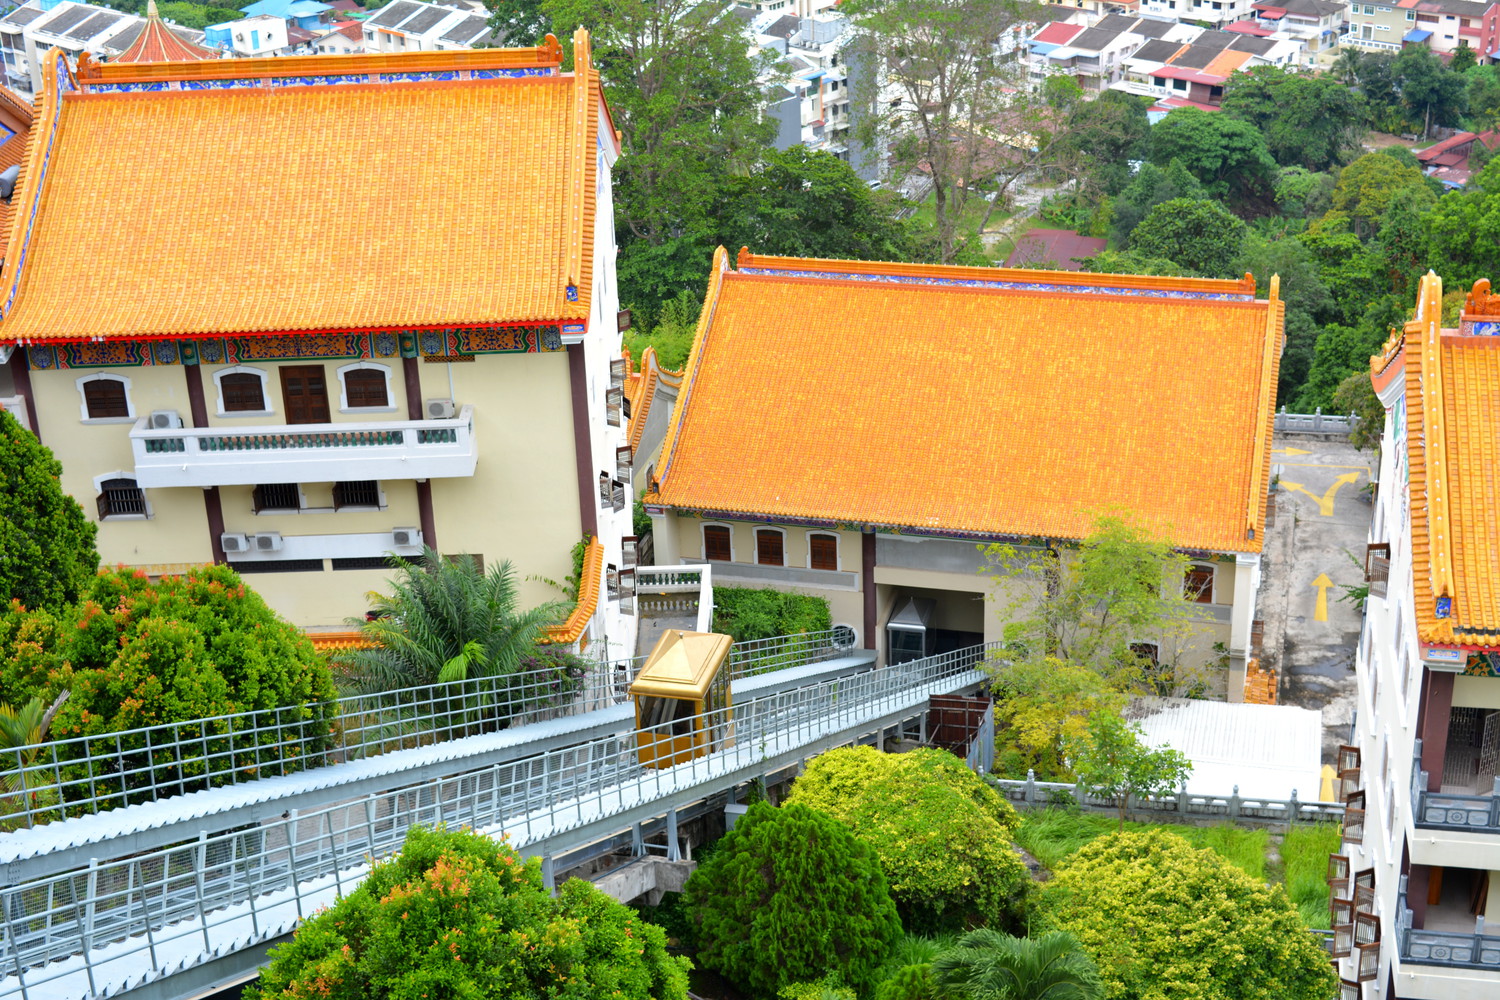 An inclined lift surrounded by buildings with bright yellow and orange tiles